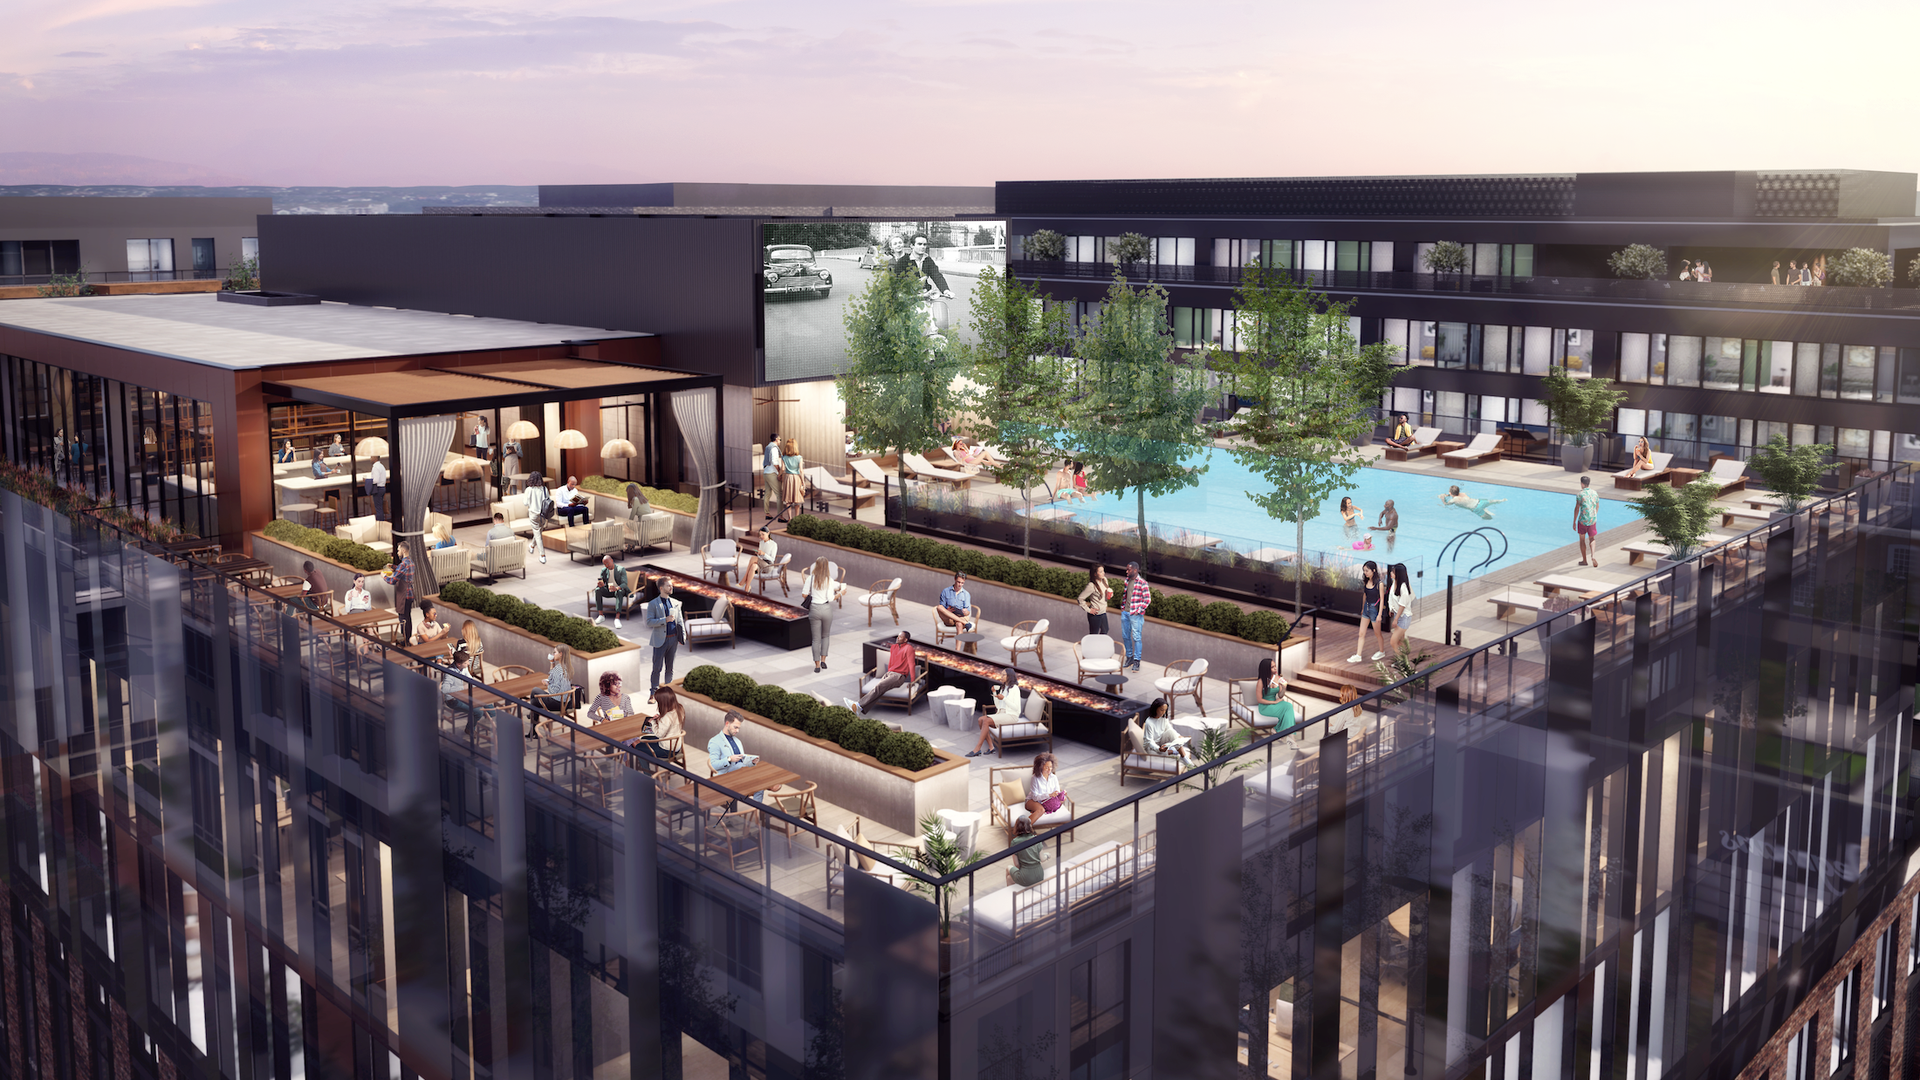 A rendering of a rooftop pool social club.